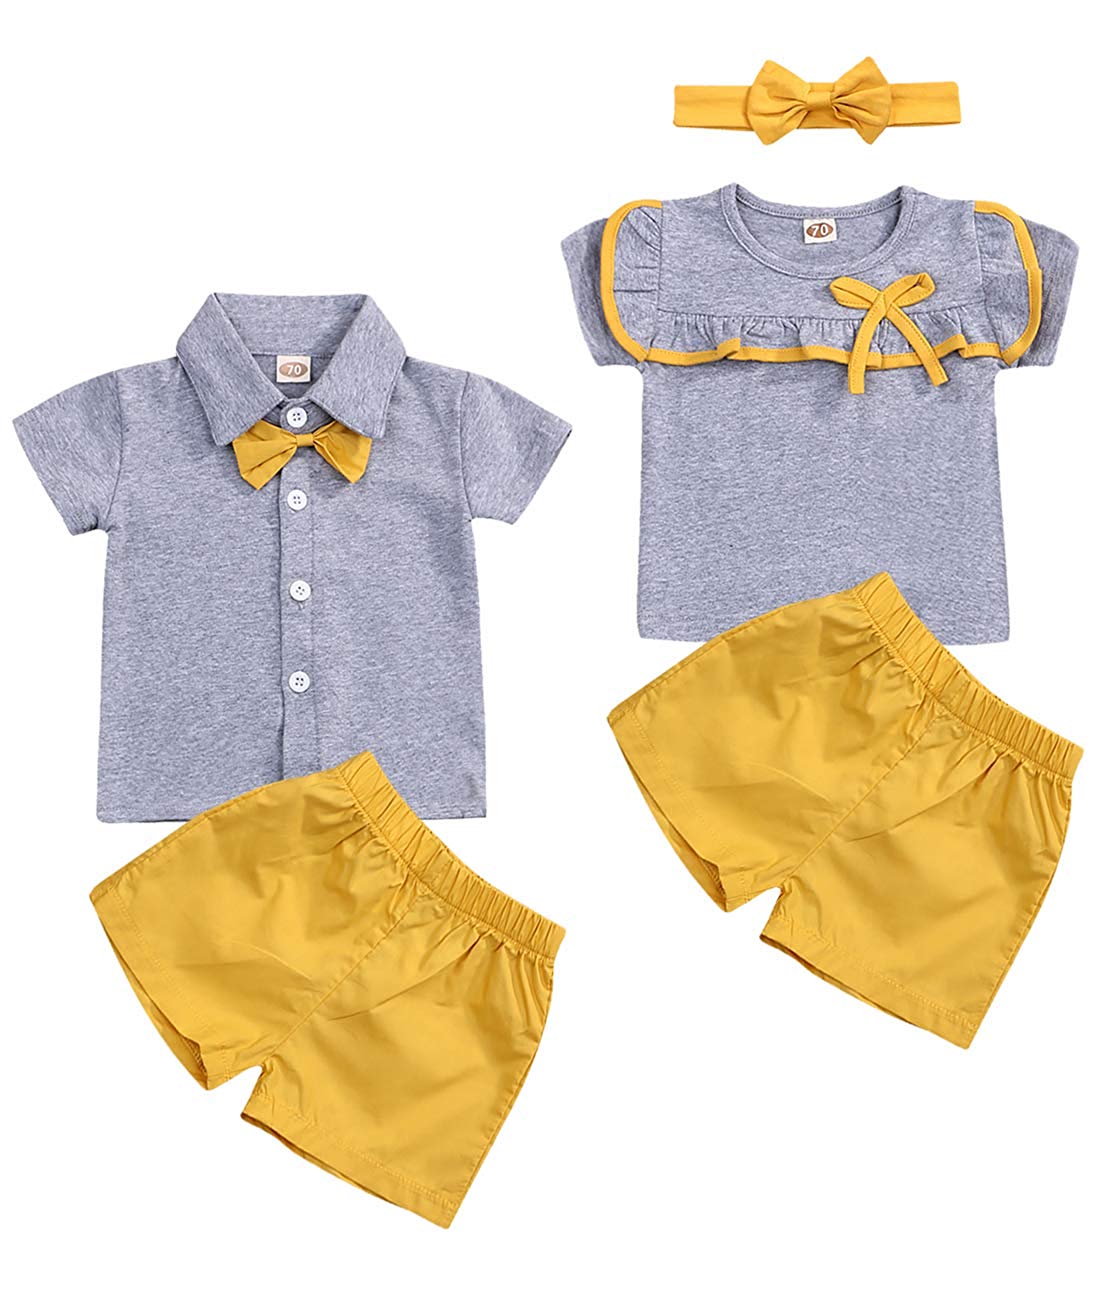 baby twin outfits